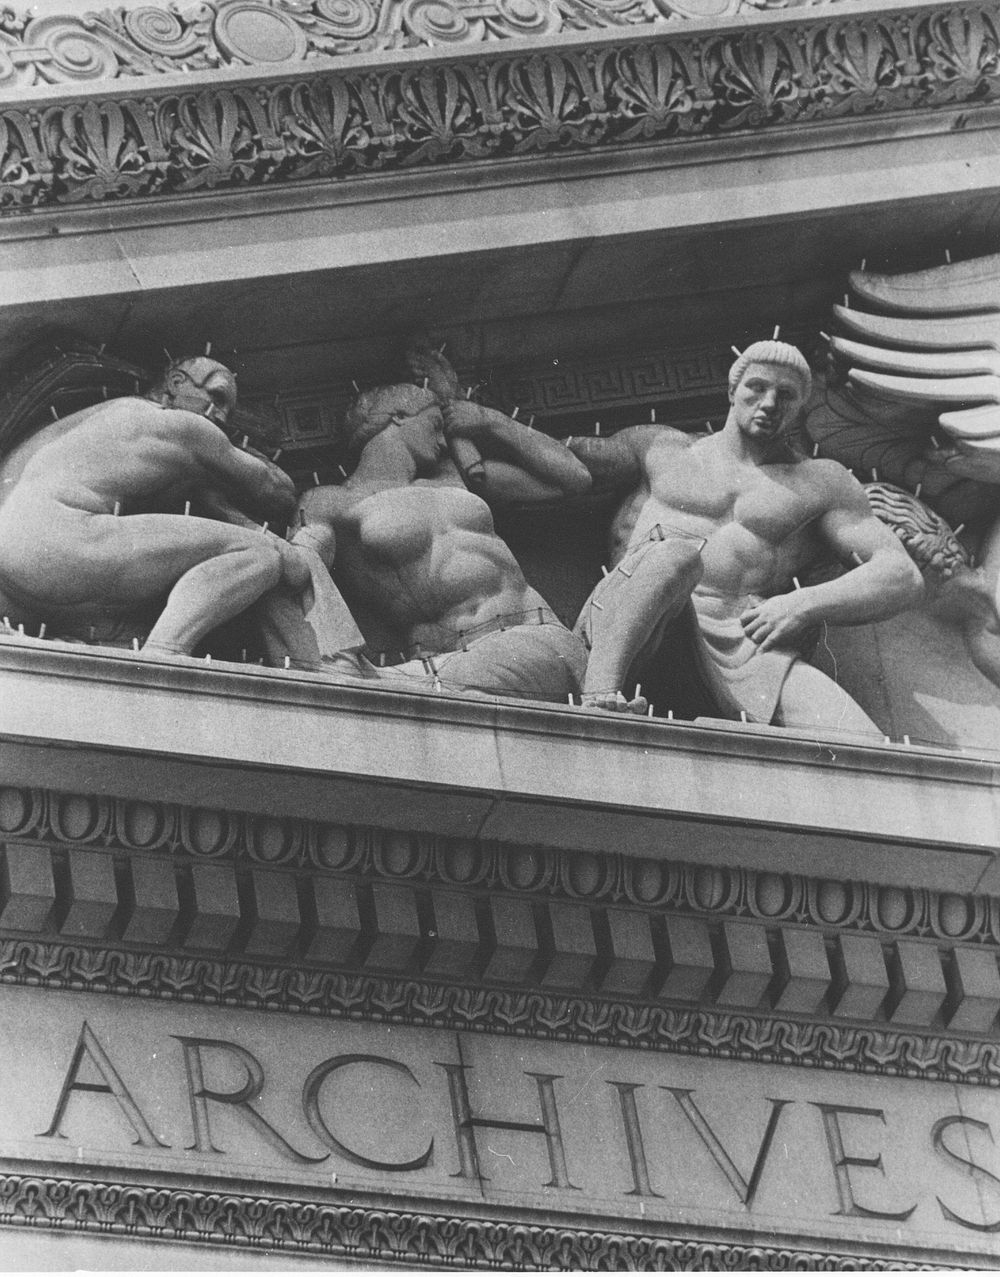 Photograph of Constitutional Avenue Fa&ccedil;ade Details of the National Archives. Original public domain image from Flickr